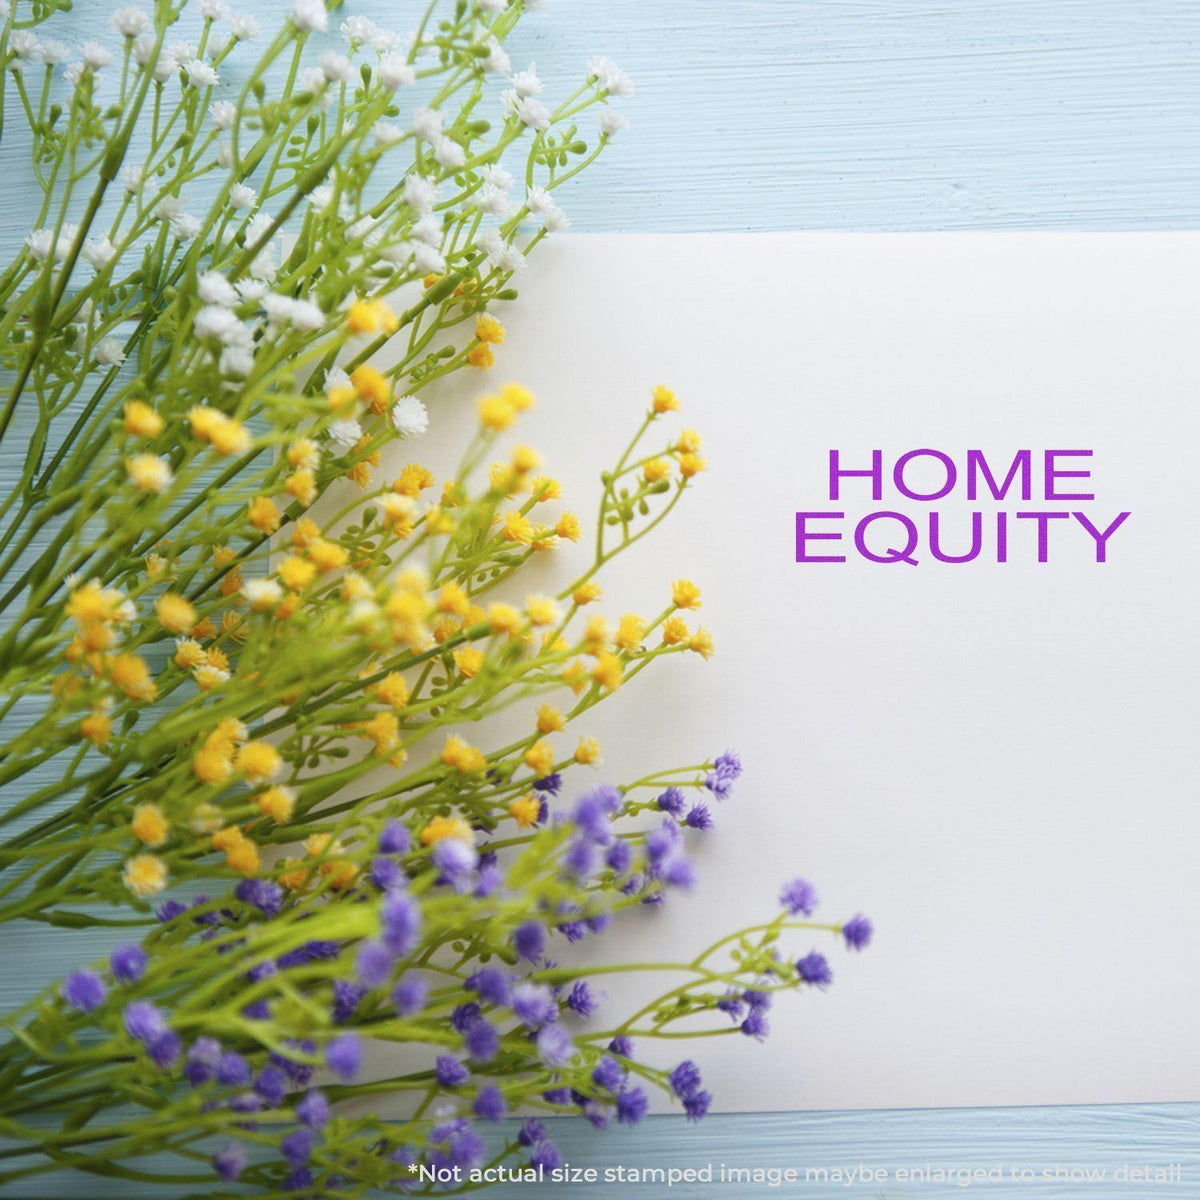 In Use Home Equity Rubber Stamp Image